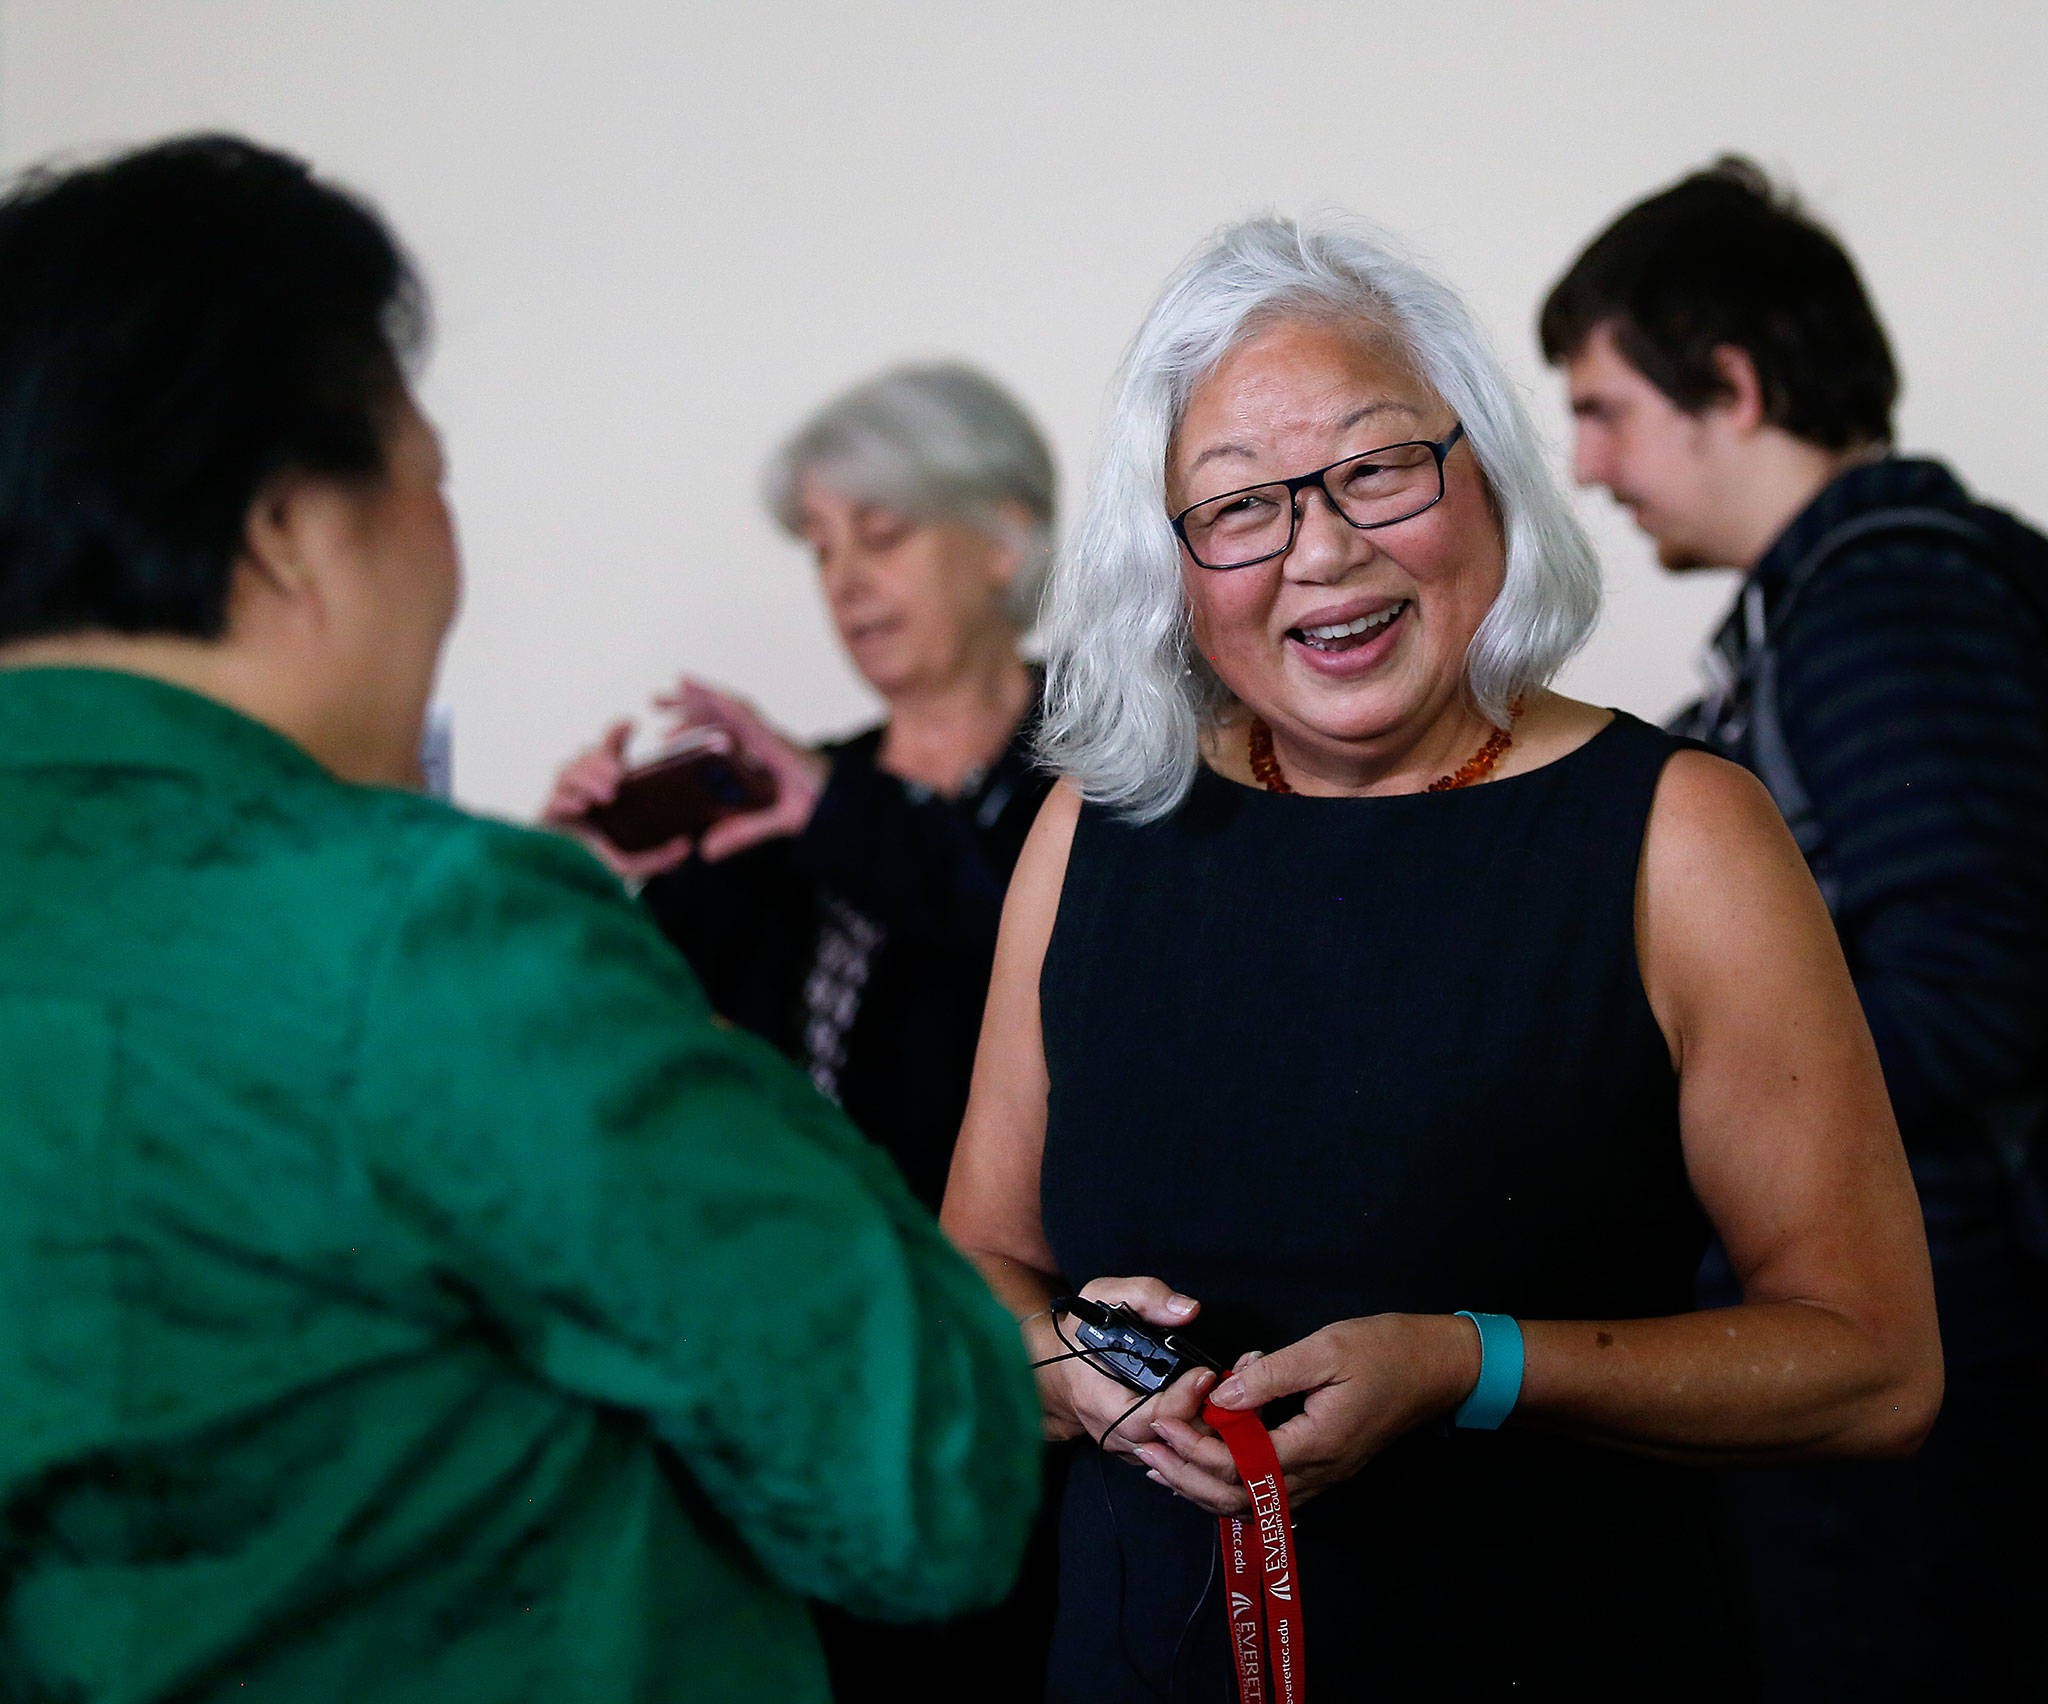 After speaking at Everett Community College about her mother’s wartime experience in Japanese internment camps Tuesday, Mayumi Tsutakawa (facing) is greeted by Van Dinh-Kuno, executive director of Refugee and Immigrant Services Northwest. (Dan Bates / The Herald)